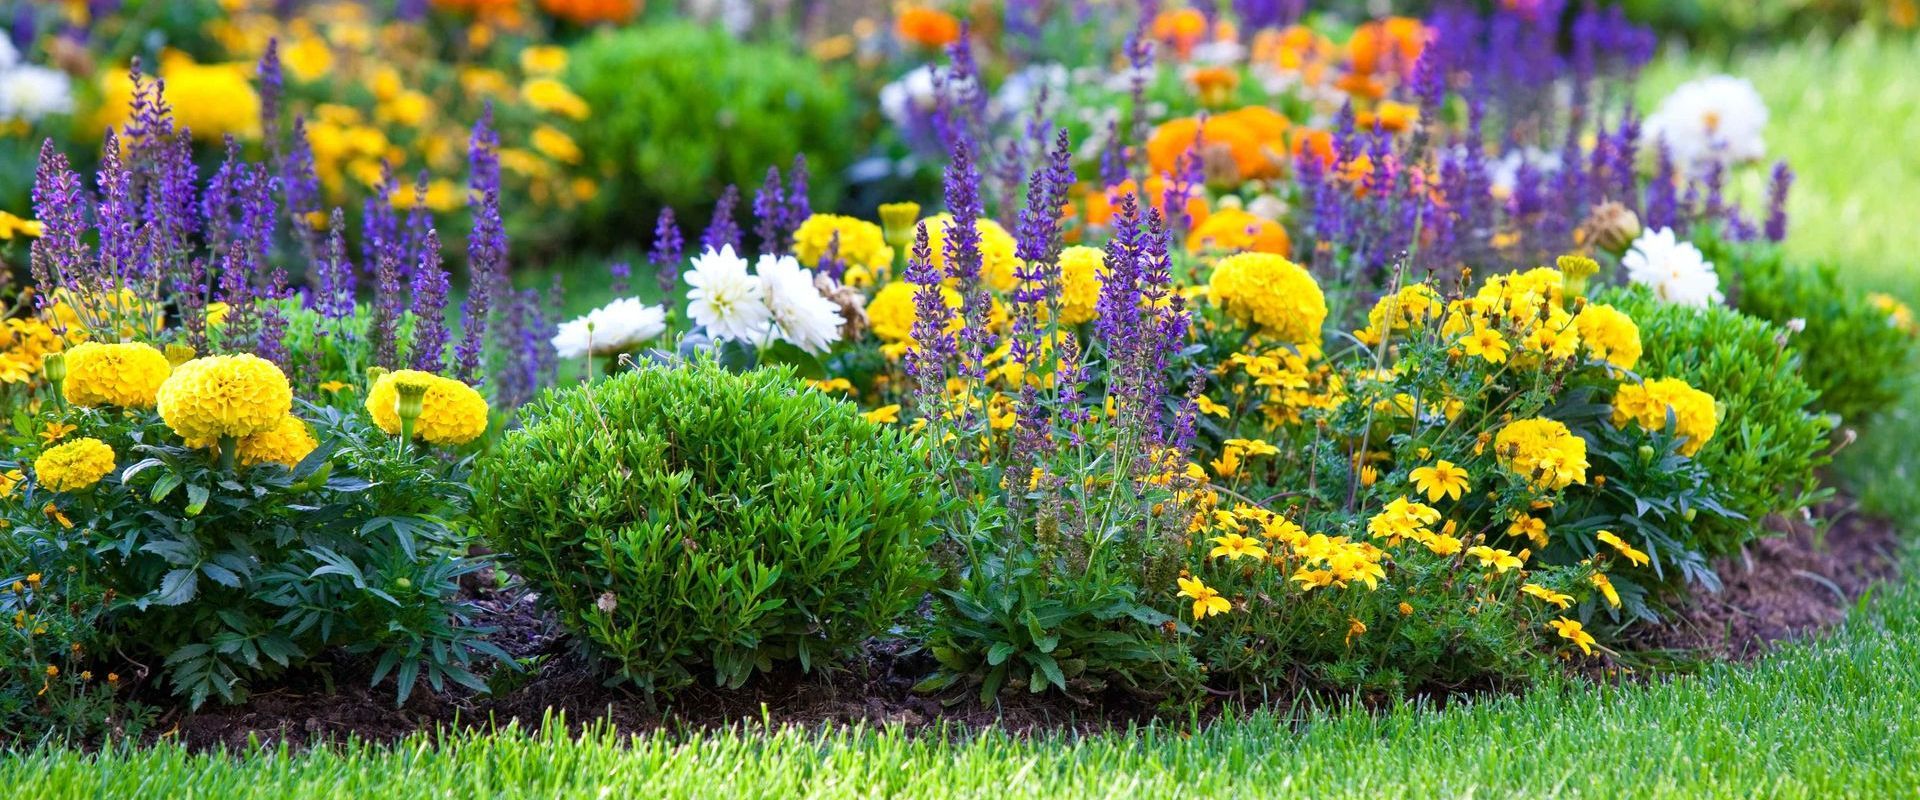 Multicolored Flower Bed Next To Lawn